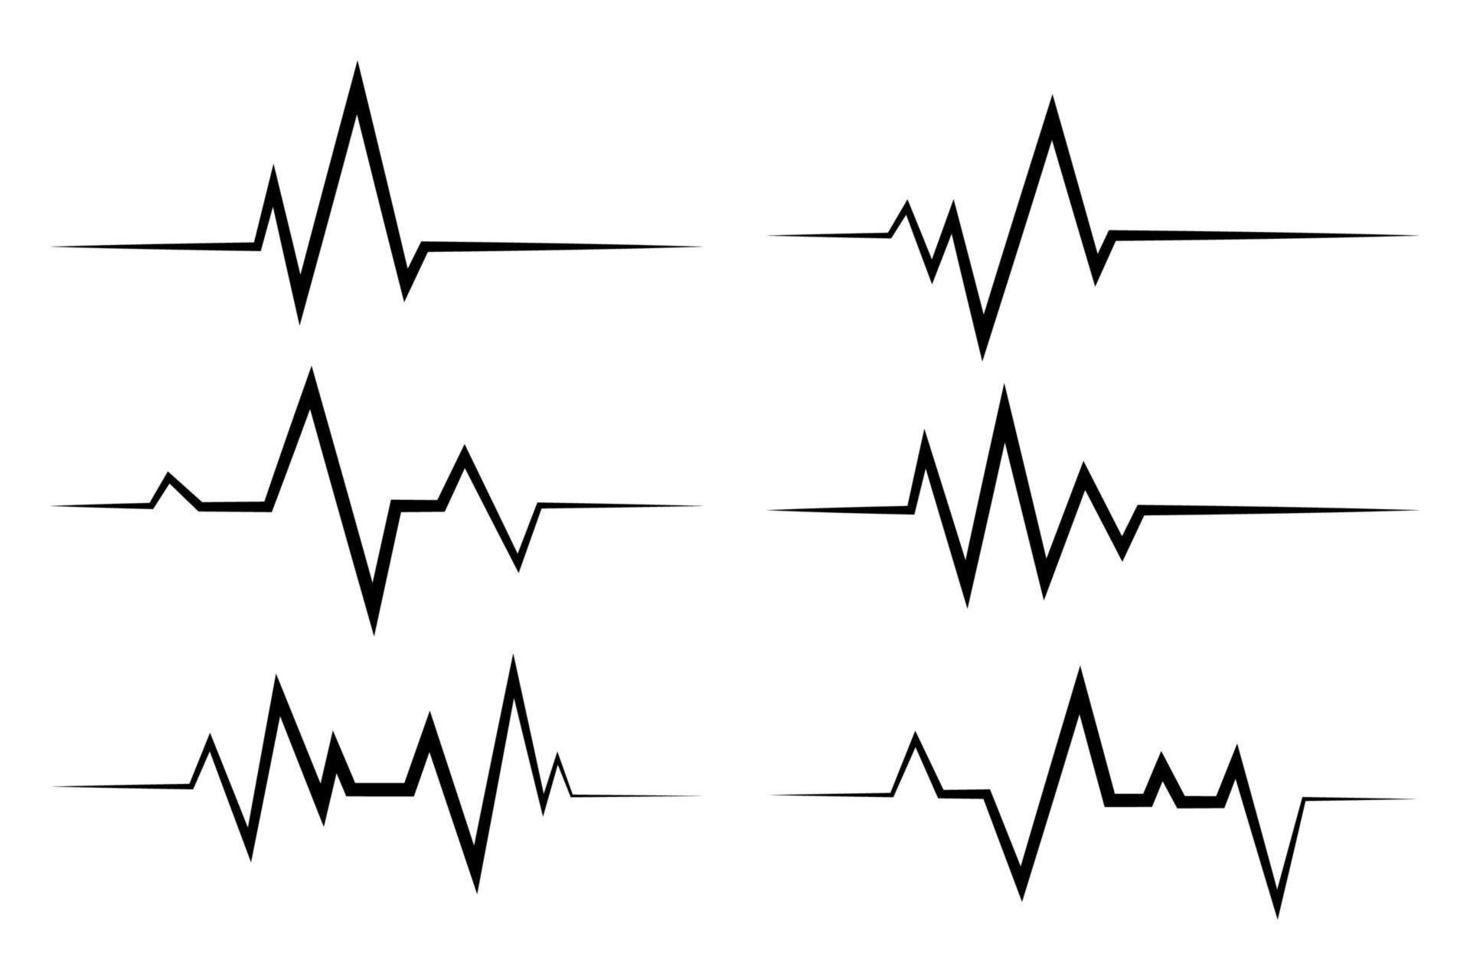 Six Ecg Heartbeat Lines Collection vector